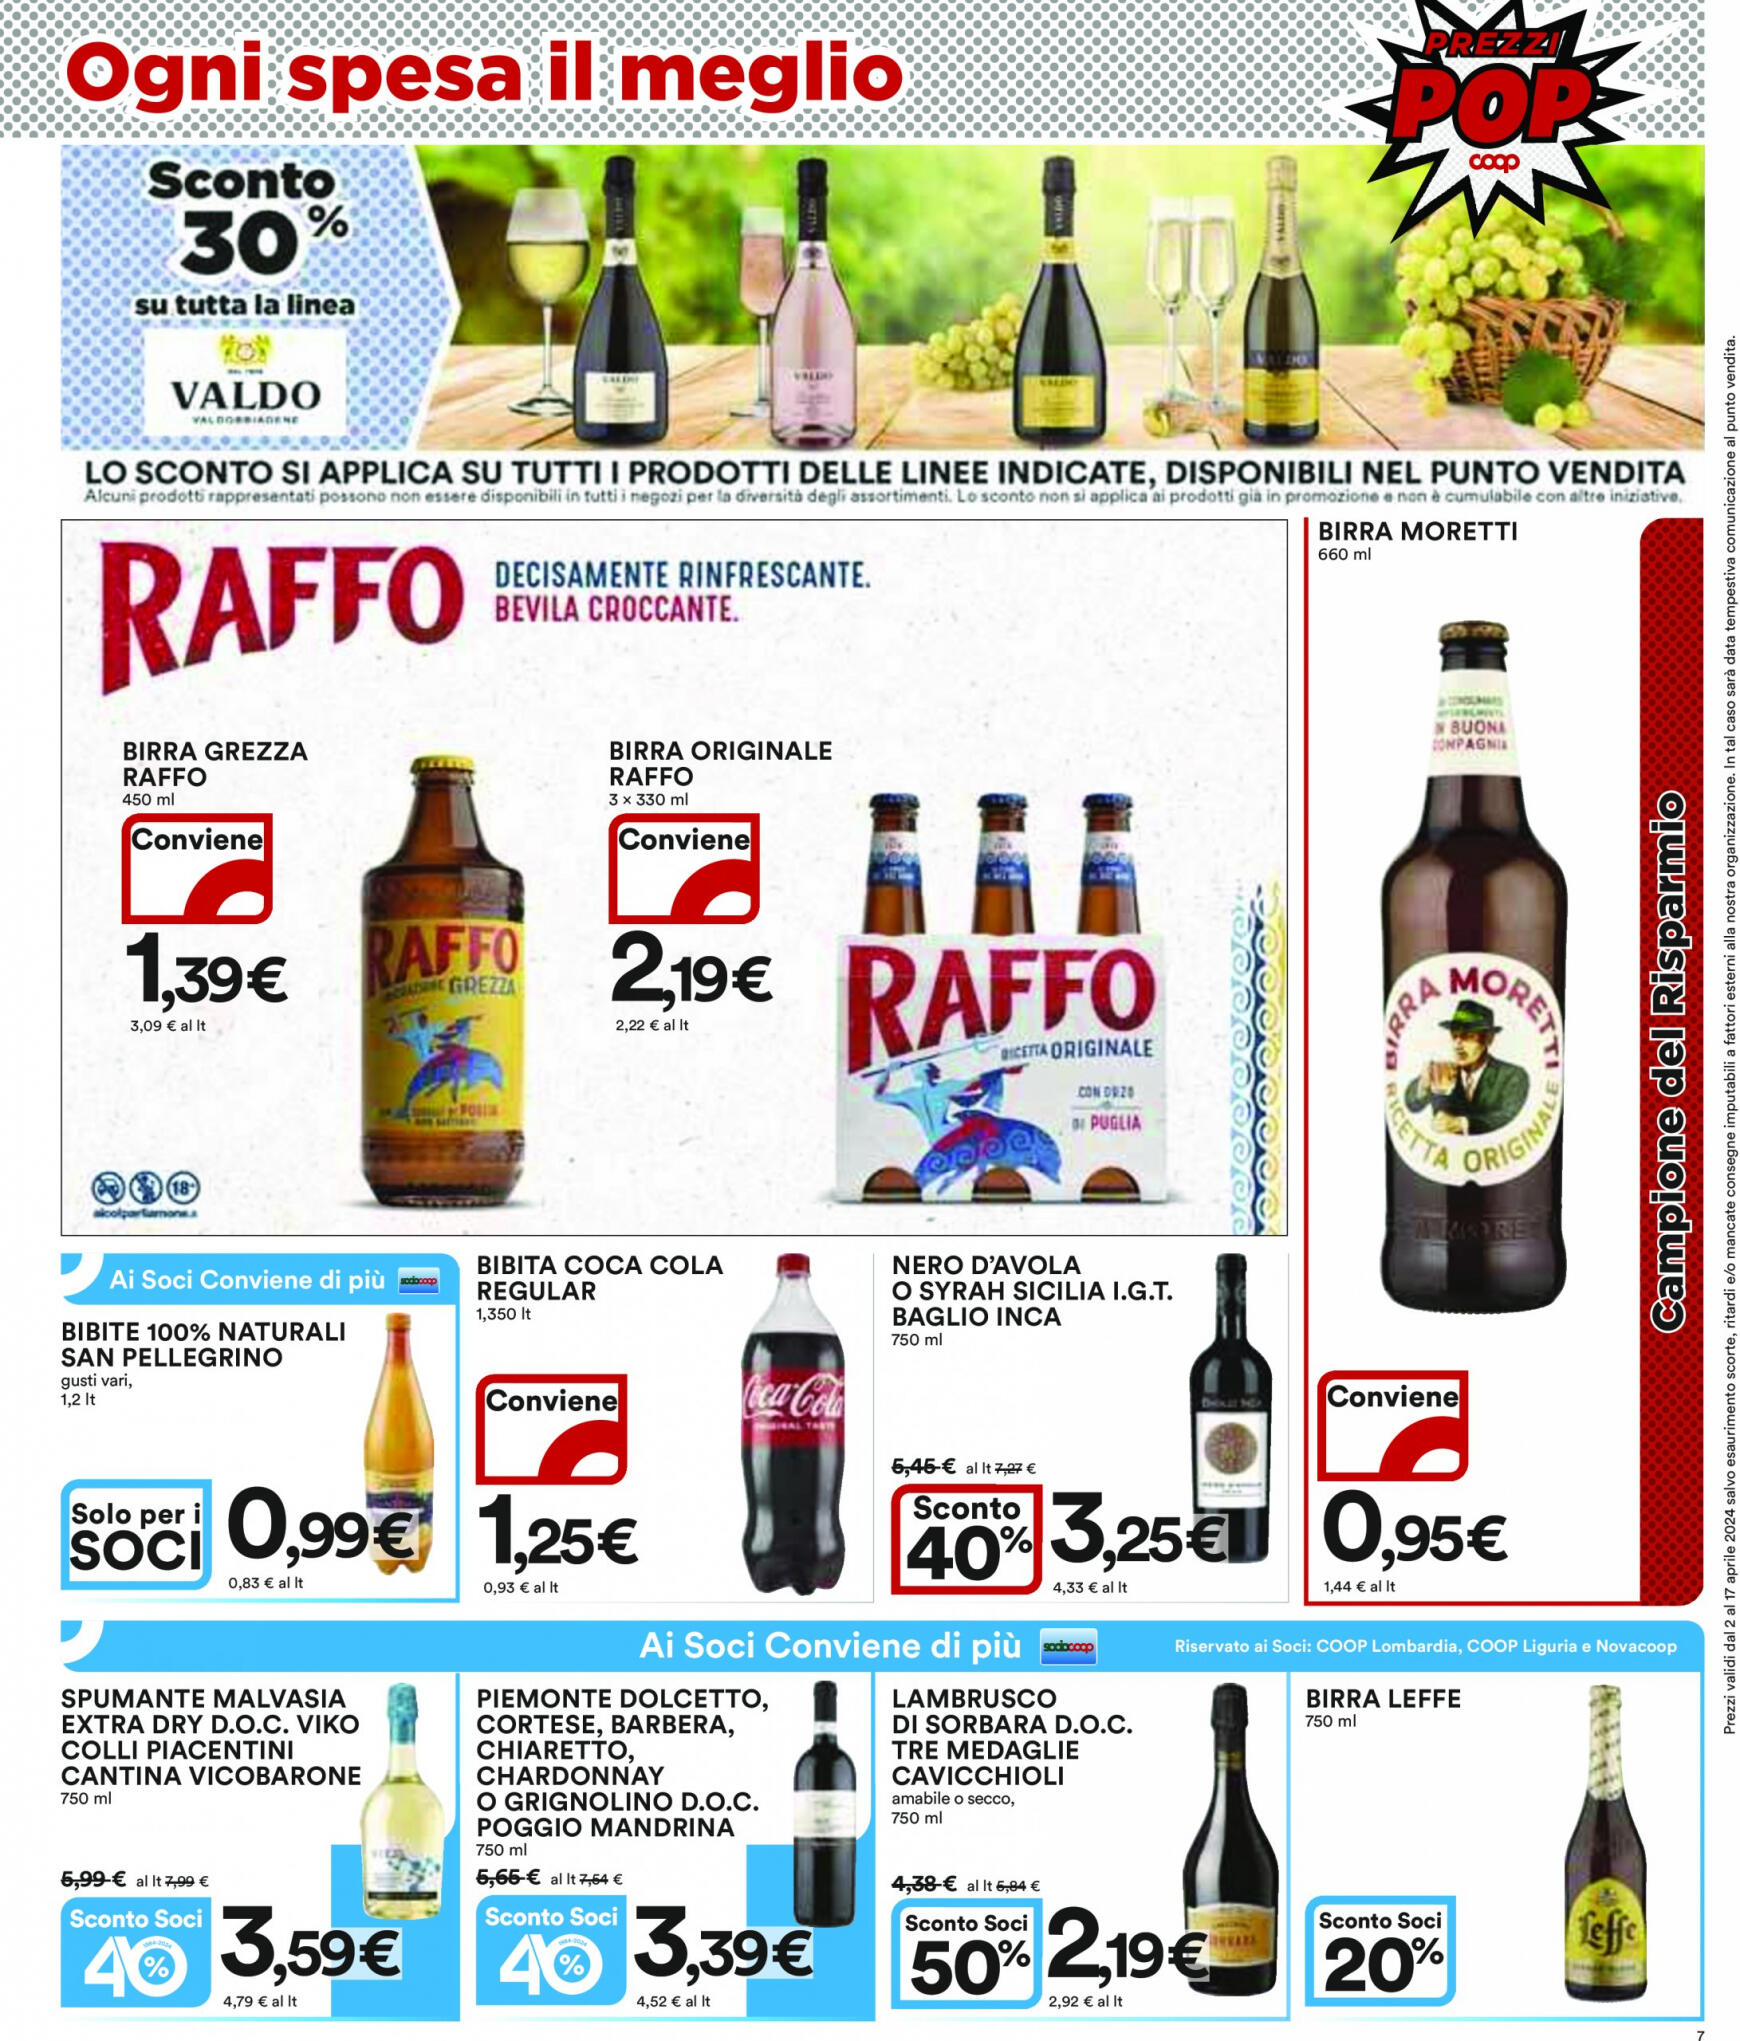 coop - Nuovo volantino Coop 02.04. - 17.04. - page: 7